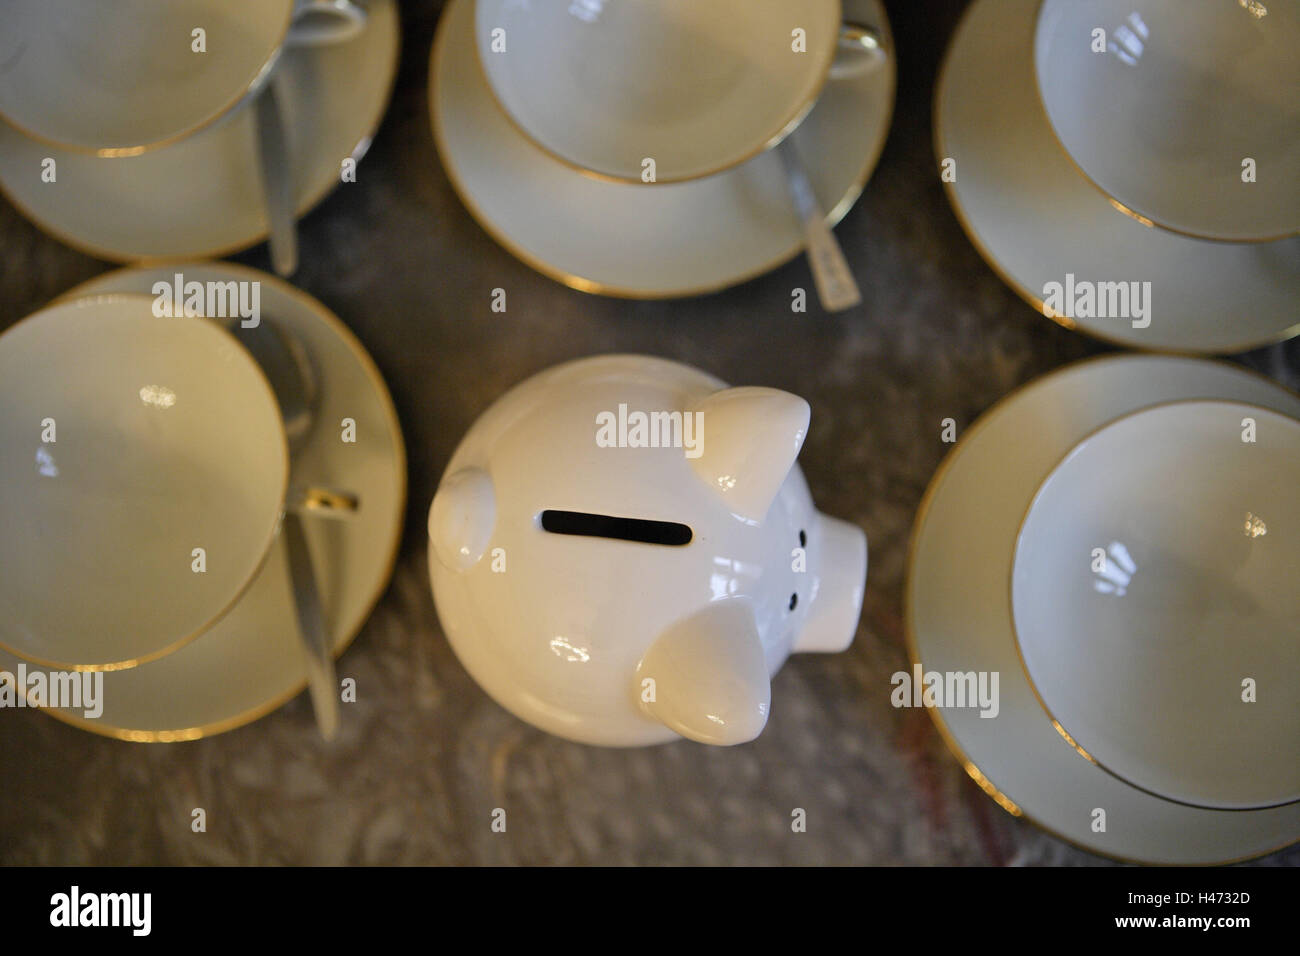 Cups, piggy bank, porcelain pig, white, dishes, unterplate, porcelain, golden margin, spoon, money, save, finances, 'bank', value, investment, invest, euro, icon, future, economy piglet, currency, financial market, economically, slot, 'economy', thrift, m Stock Photo